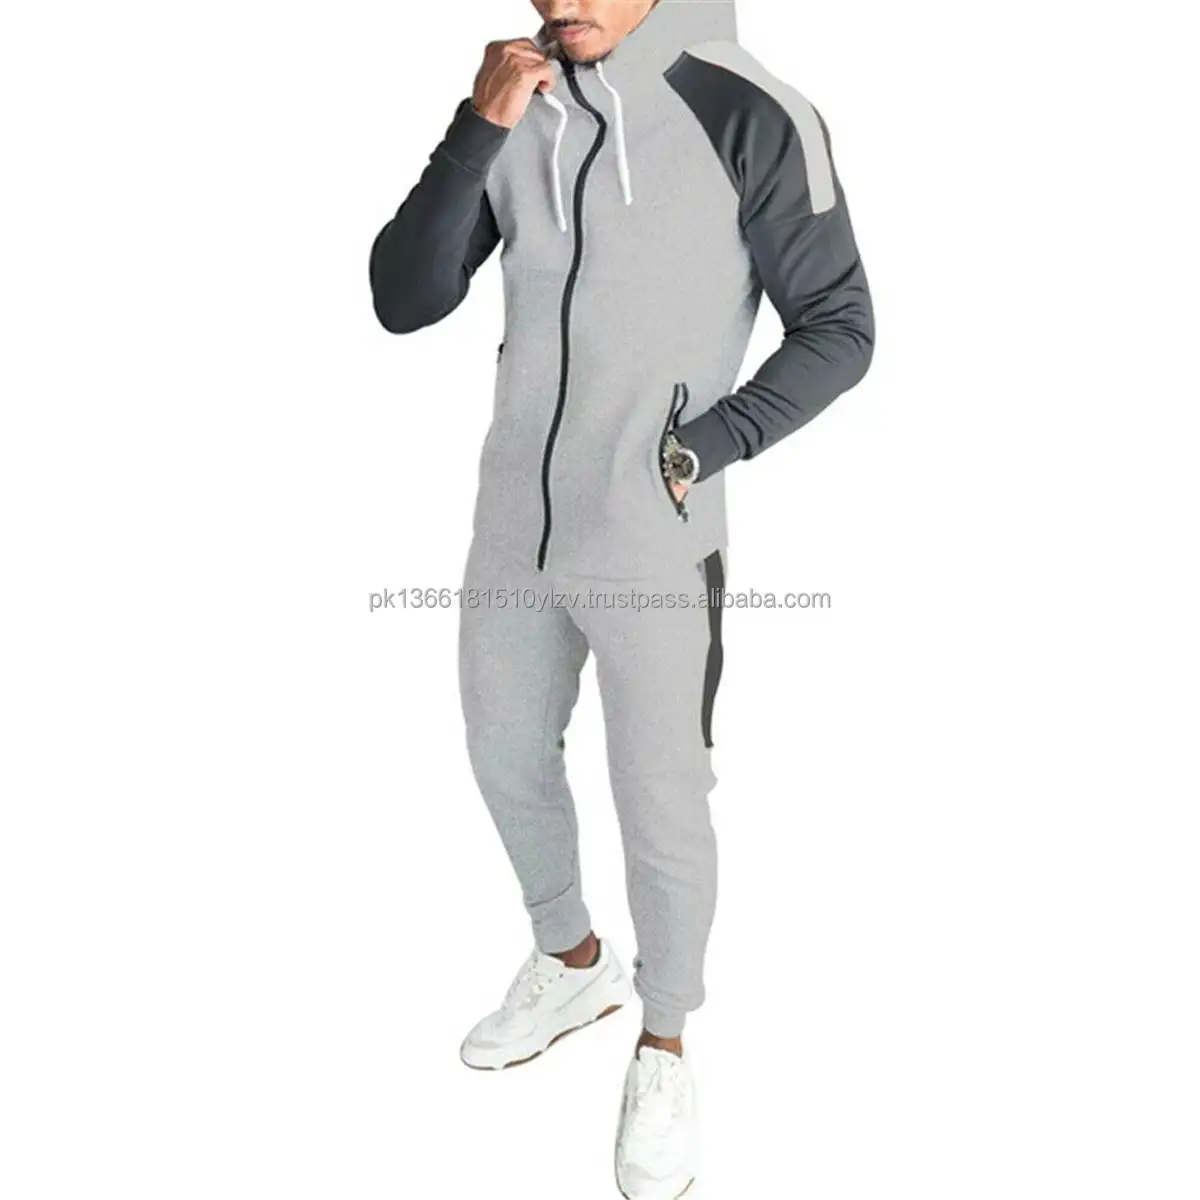 Mens muscle fit track suits running jogger wear poly gym apparel Wholesale Gym Sportswear Fleece Tech two piece jogging suits